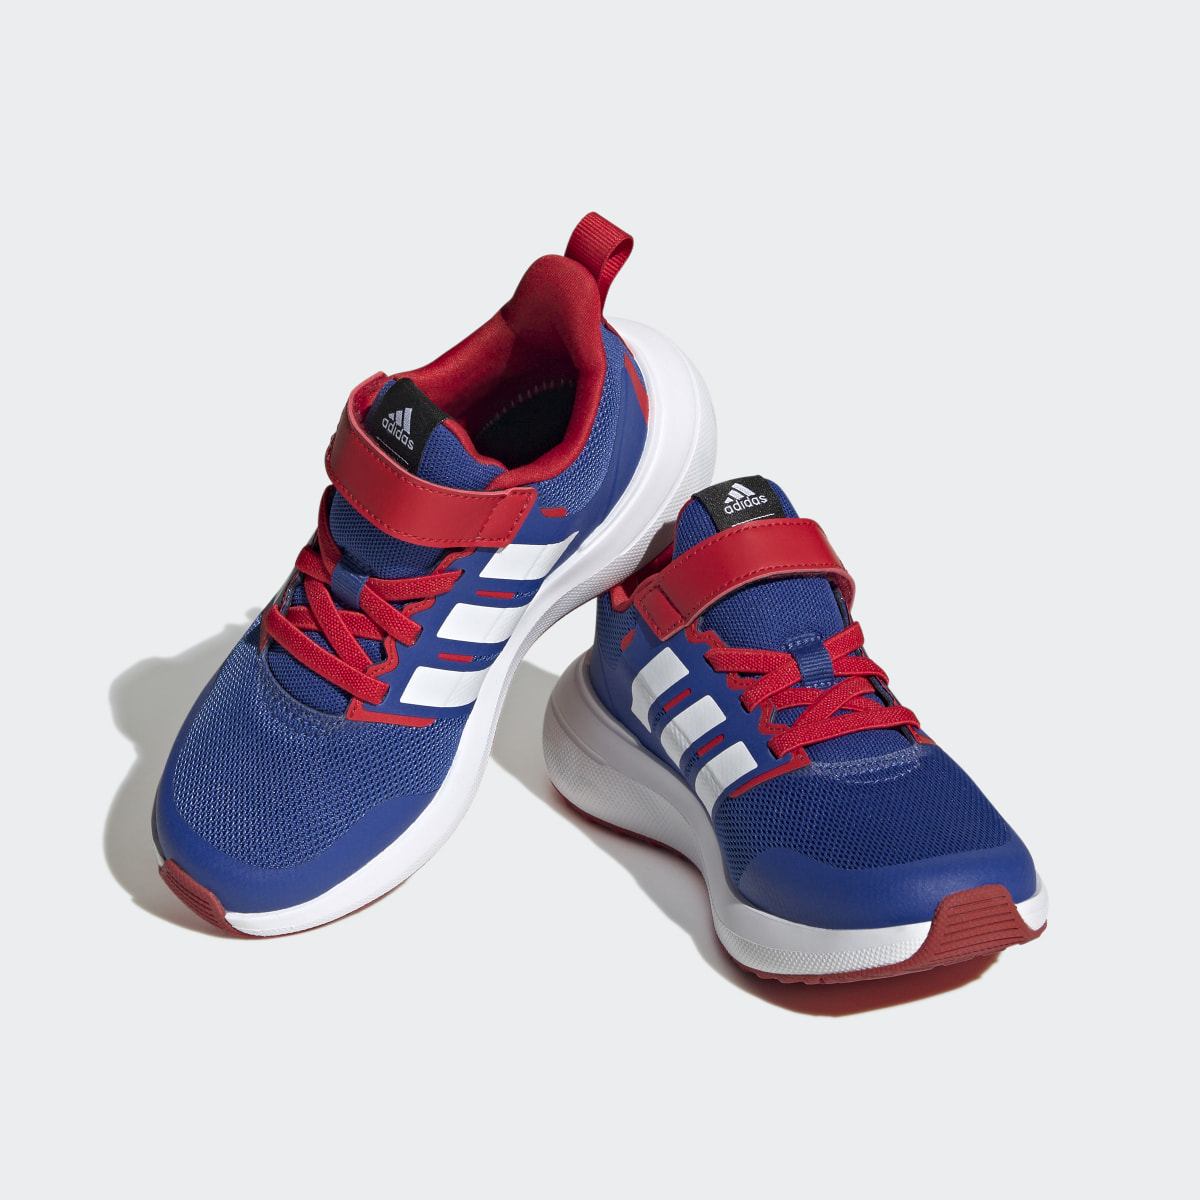 Adidas x Marvel FortaRun Spider-Man 2.0 Cloudfoam Sport Lace Top Strap Shoes. 5